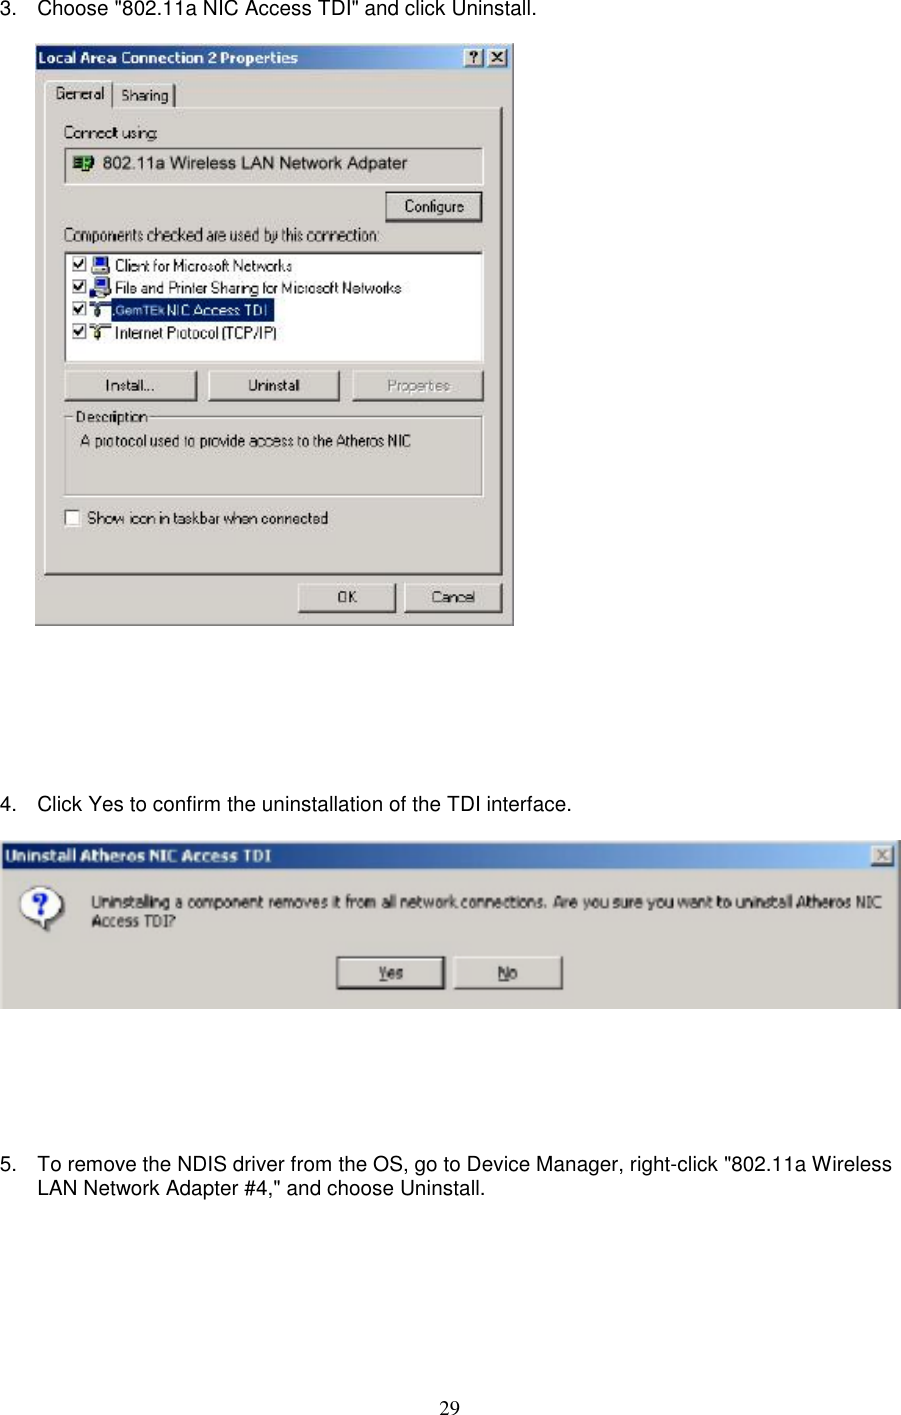 293.  Choose &quot;802.11a NIC Access TDI&quot; and click Uninstall.4.  Click Yes to confirm the uninstallation of the TDI interface.5.  To remove the NDIS driver from the OS, go to Device Manager, right-click &quot;802.11a WirelessLAN Network Adapter #4,&quot; and choose Uninstall.